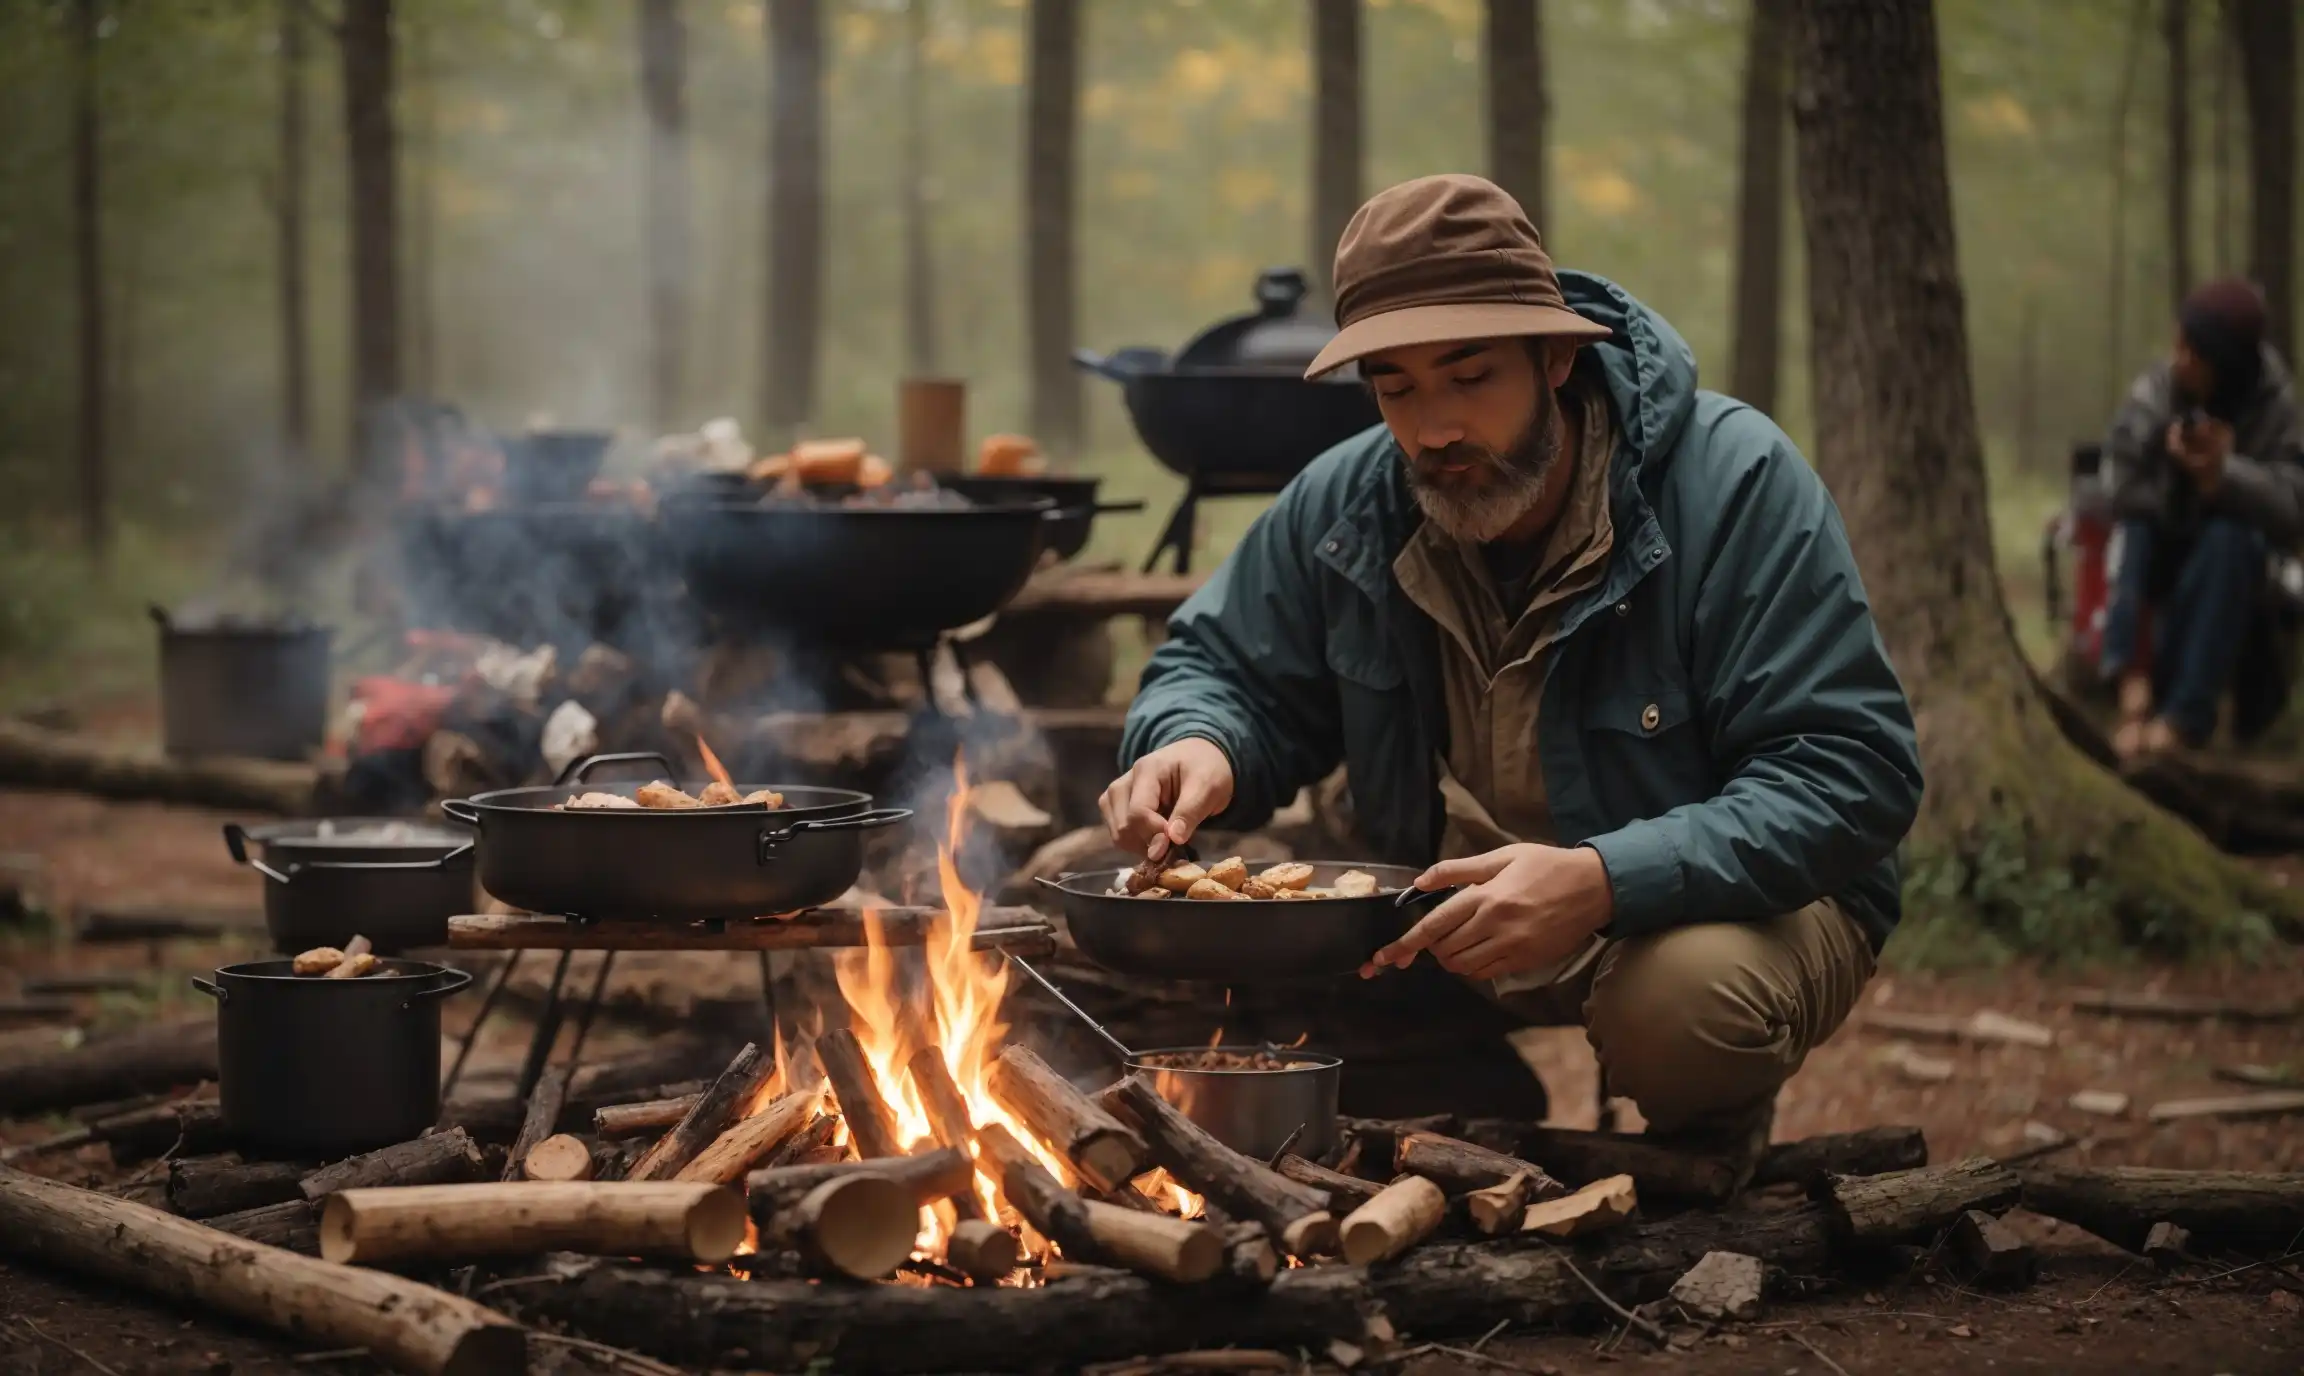 Food Safety for Campfire Cooking